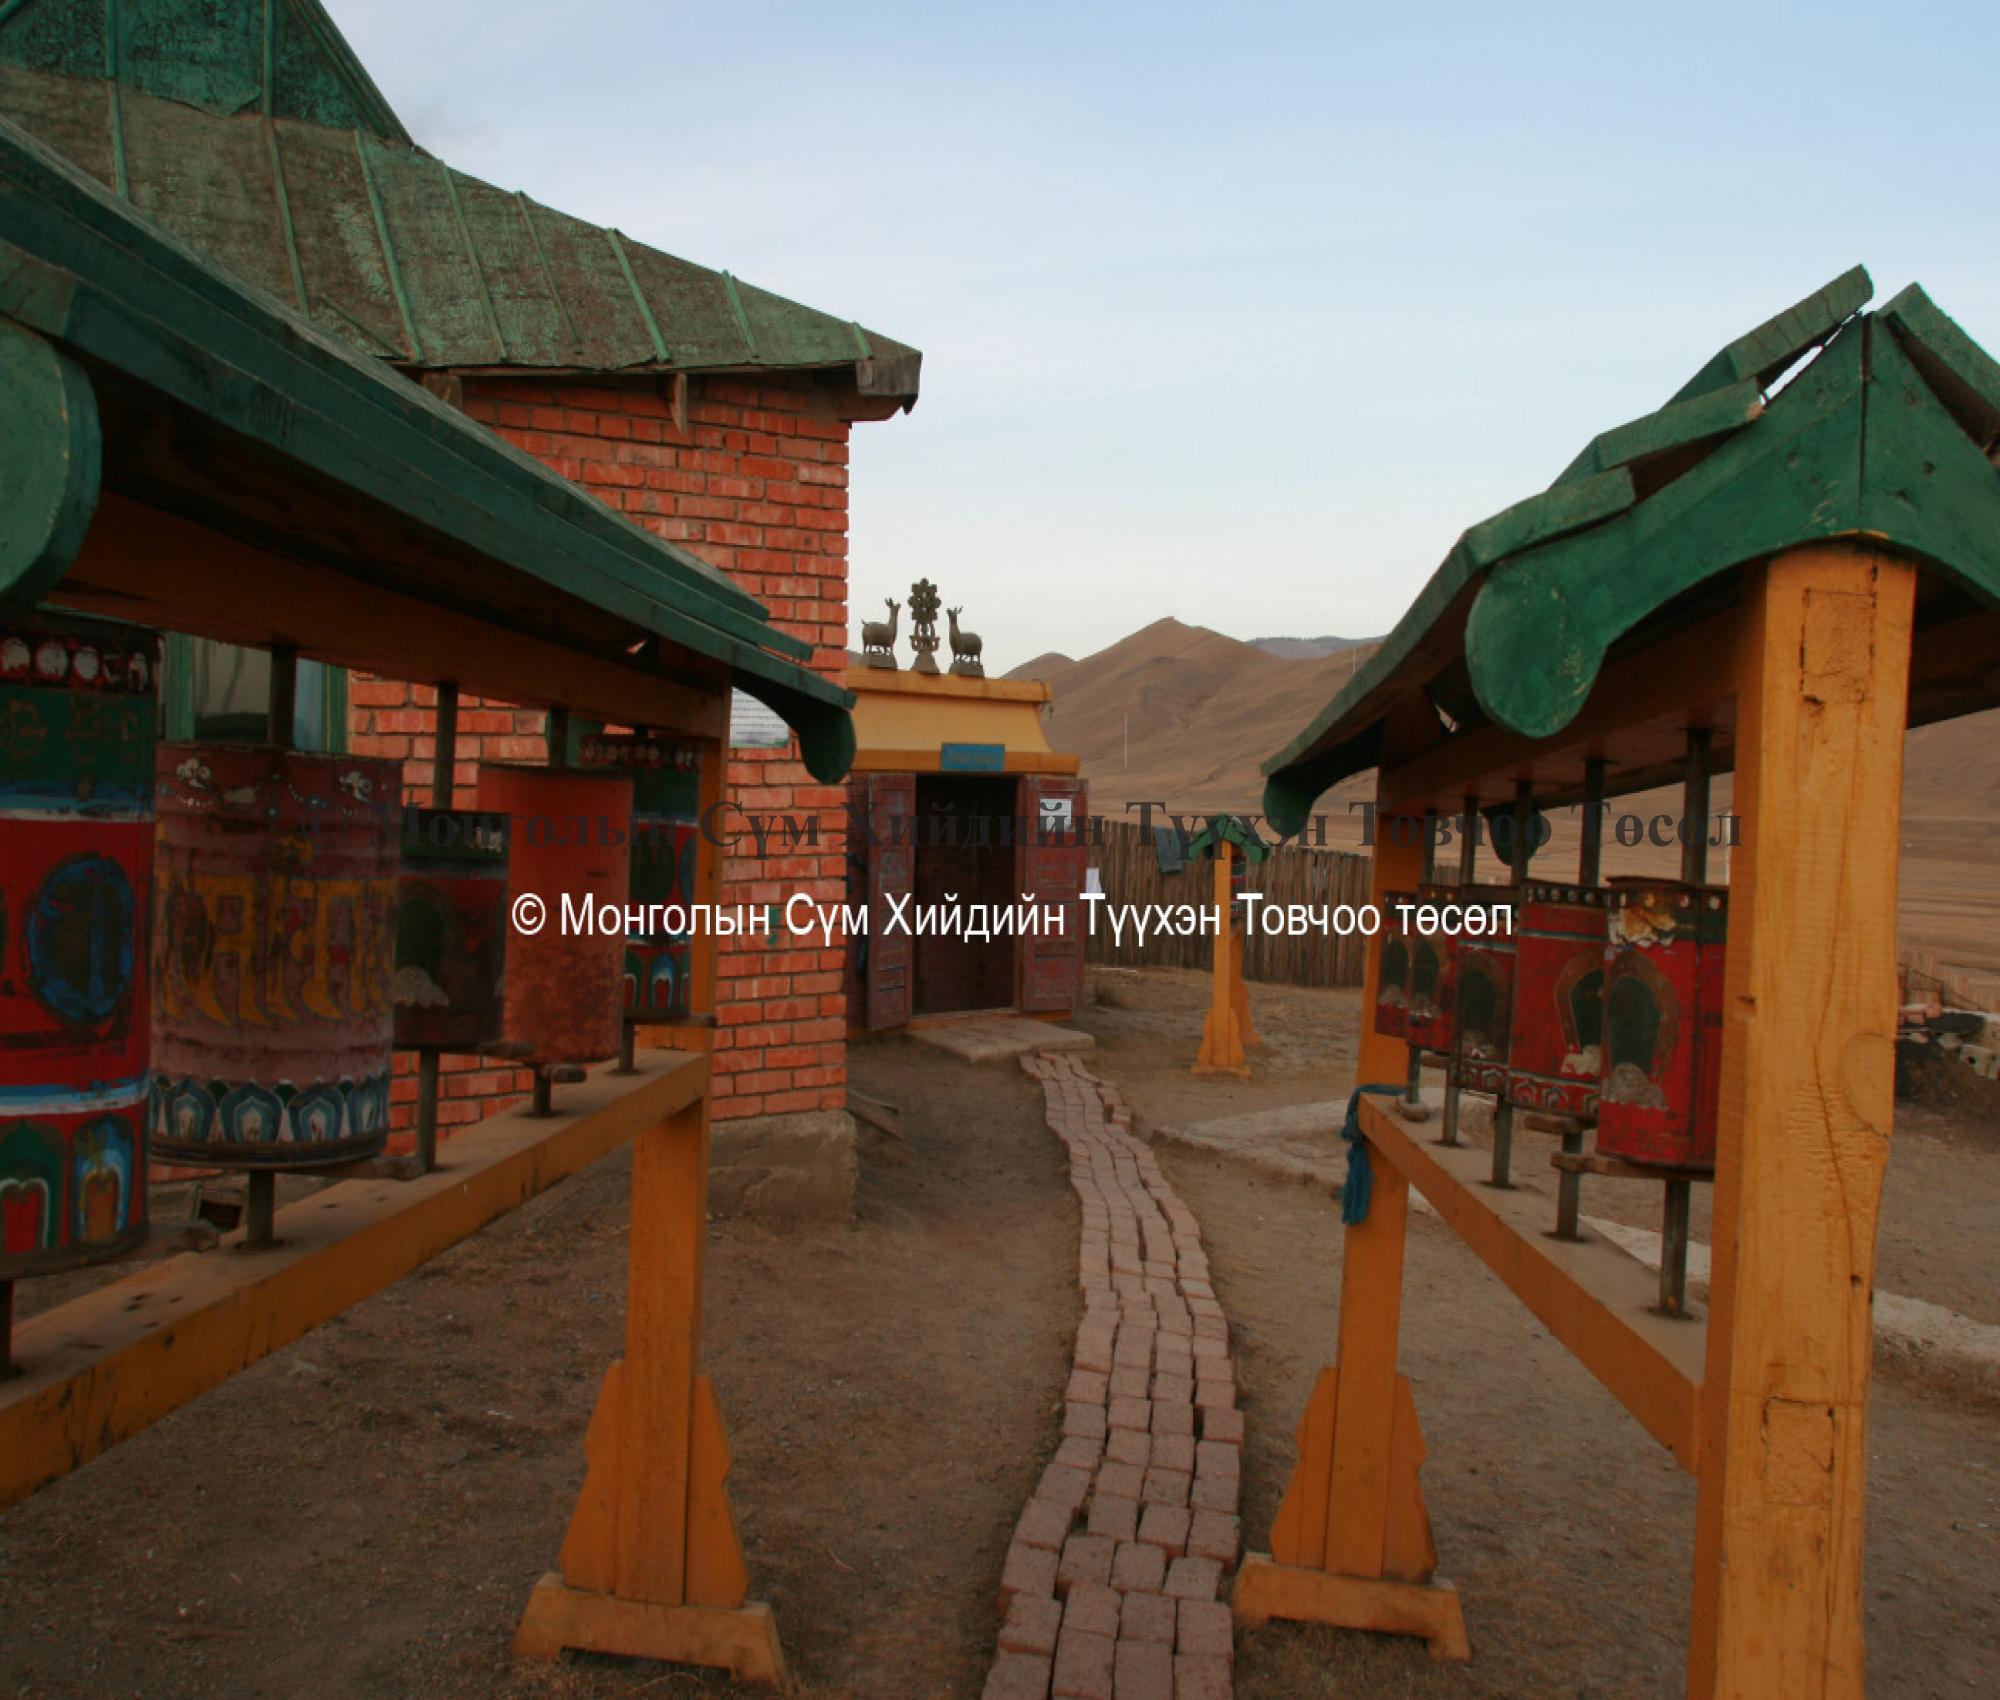 Path leading to the yurt-temple